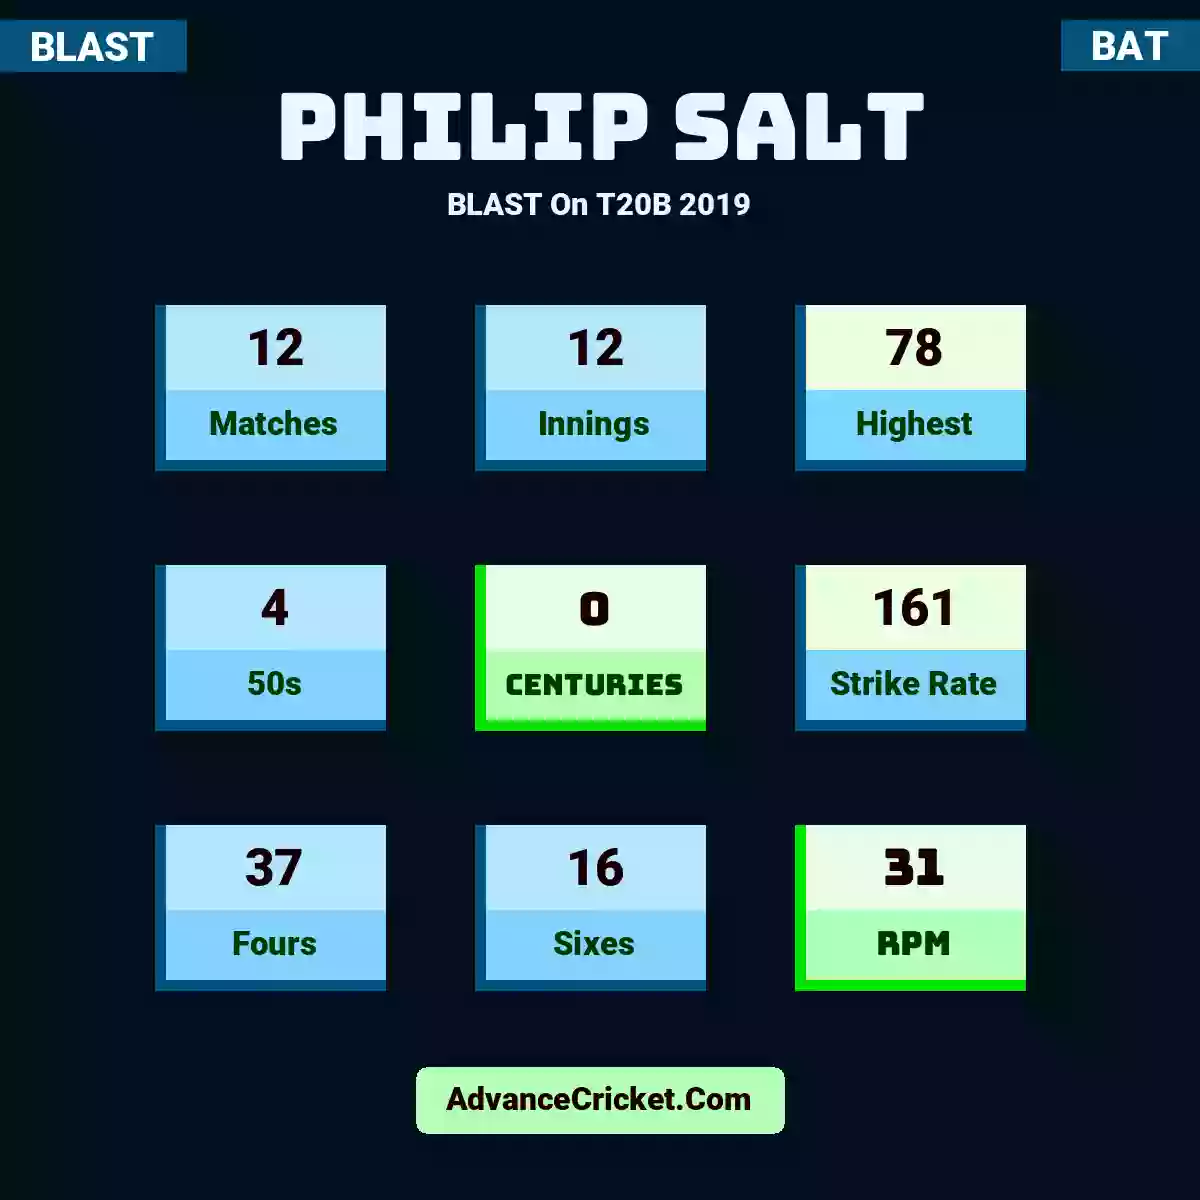 Philip Salt BLAST  On T20B 2019, Philip Salt played 12 matches, scored 78 runs as highest, 4 half-centuries, and 0 centuries, with a strike rate of 161. P.Salt hit 37 fours and 16 sixes, with an RPM of 31.